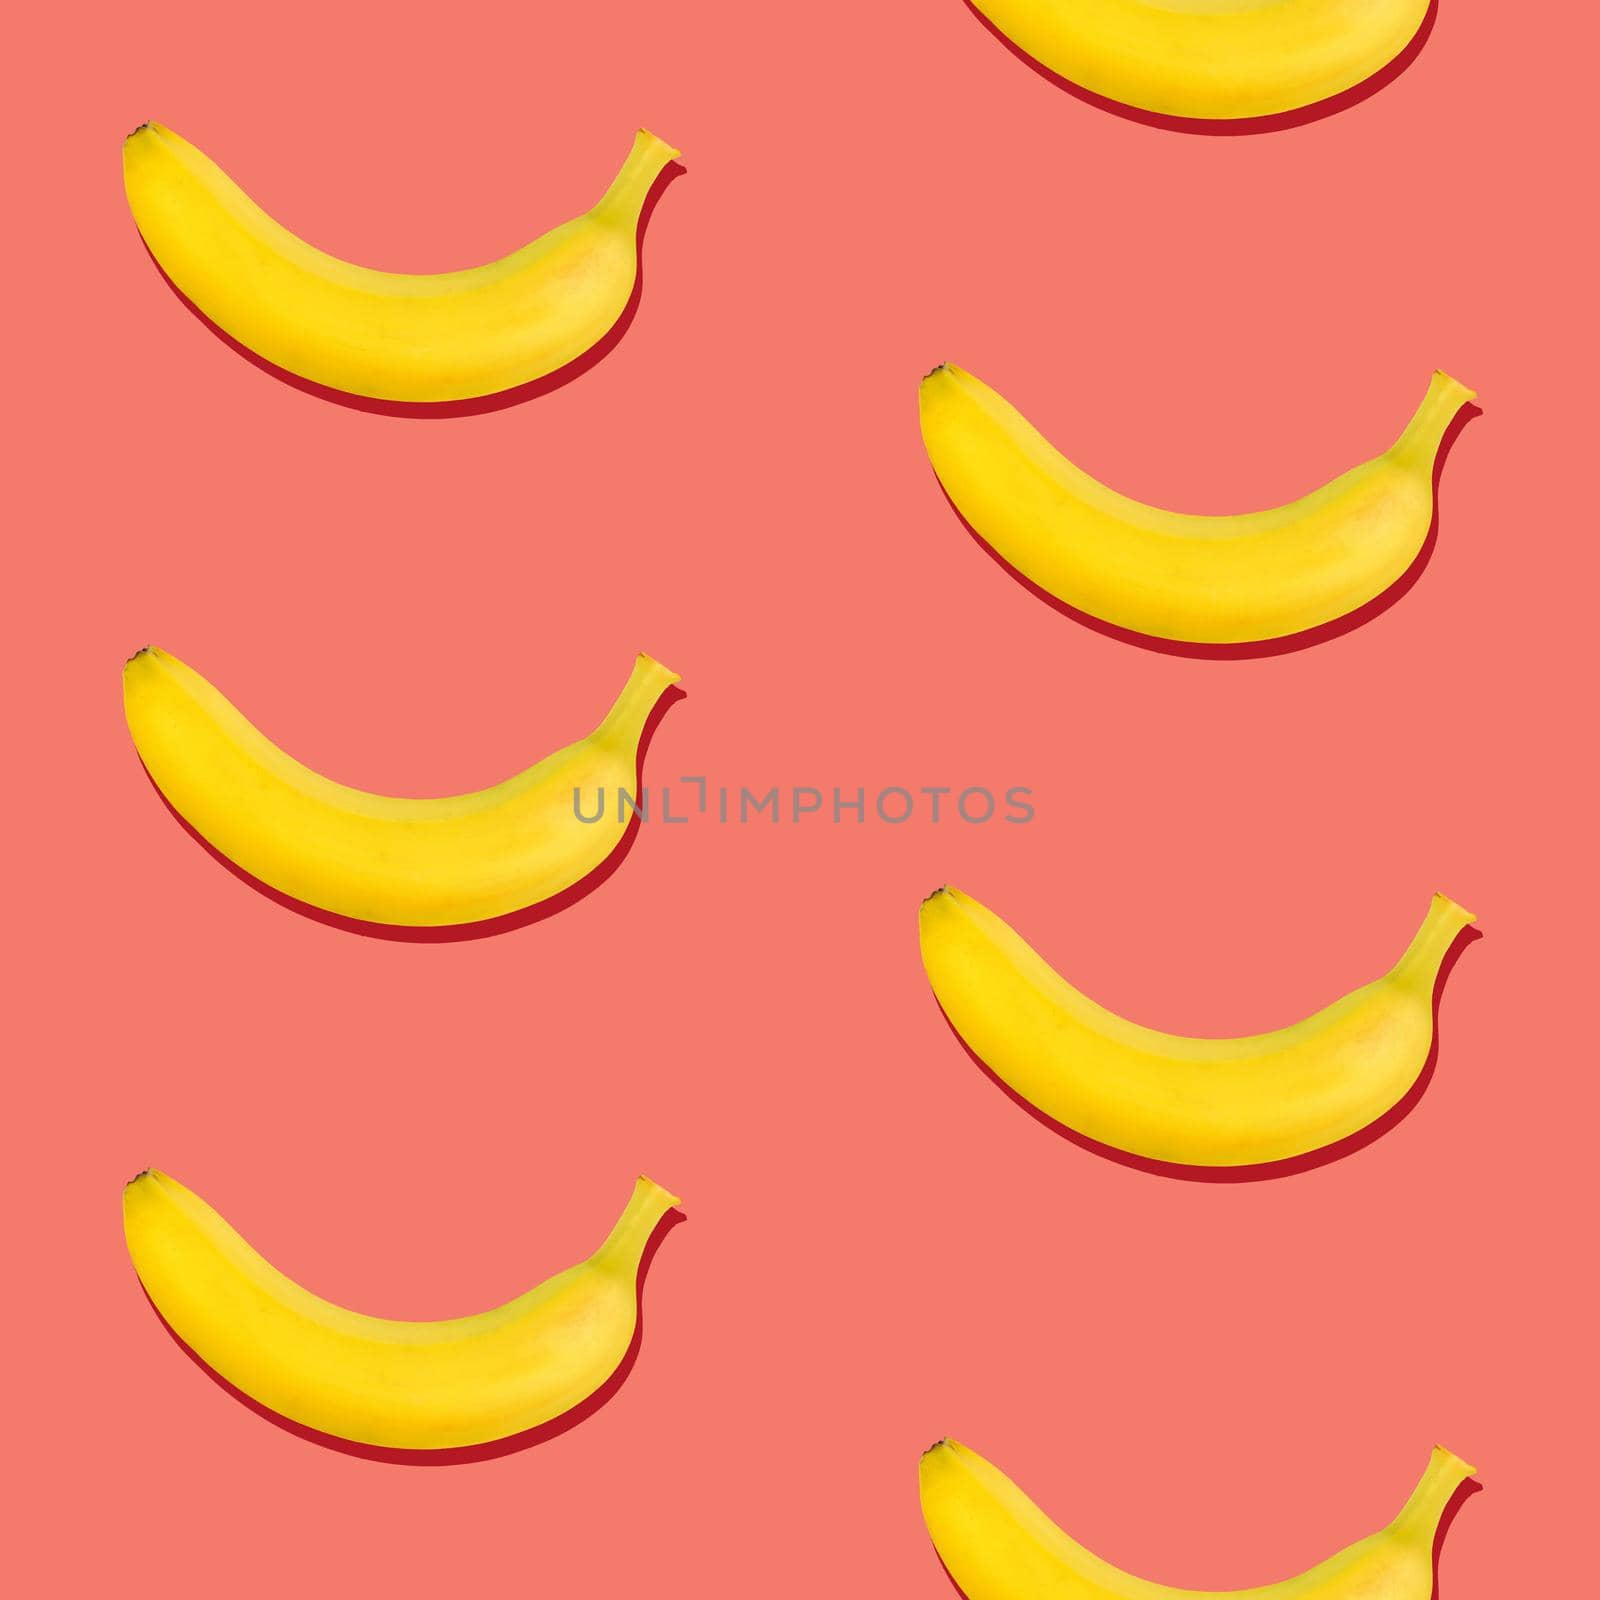 Seamless pattern of fresh ripe yellow bananas on coral pink background